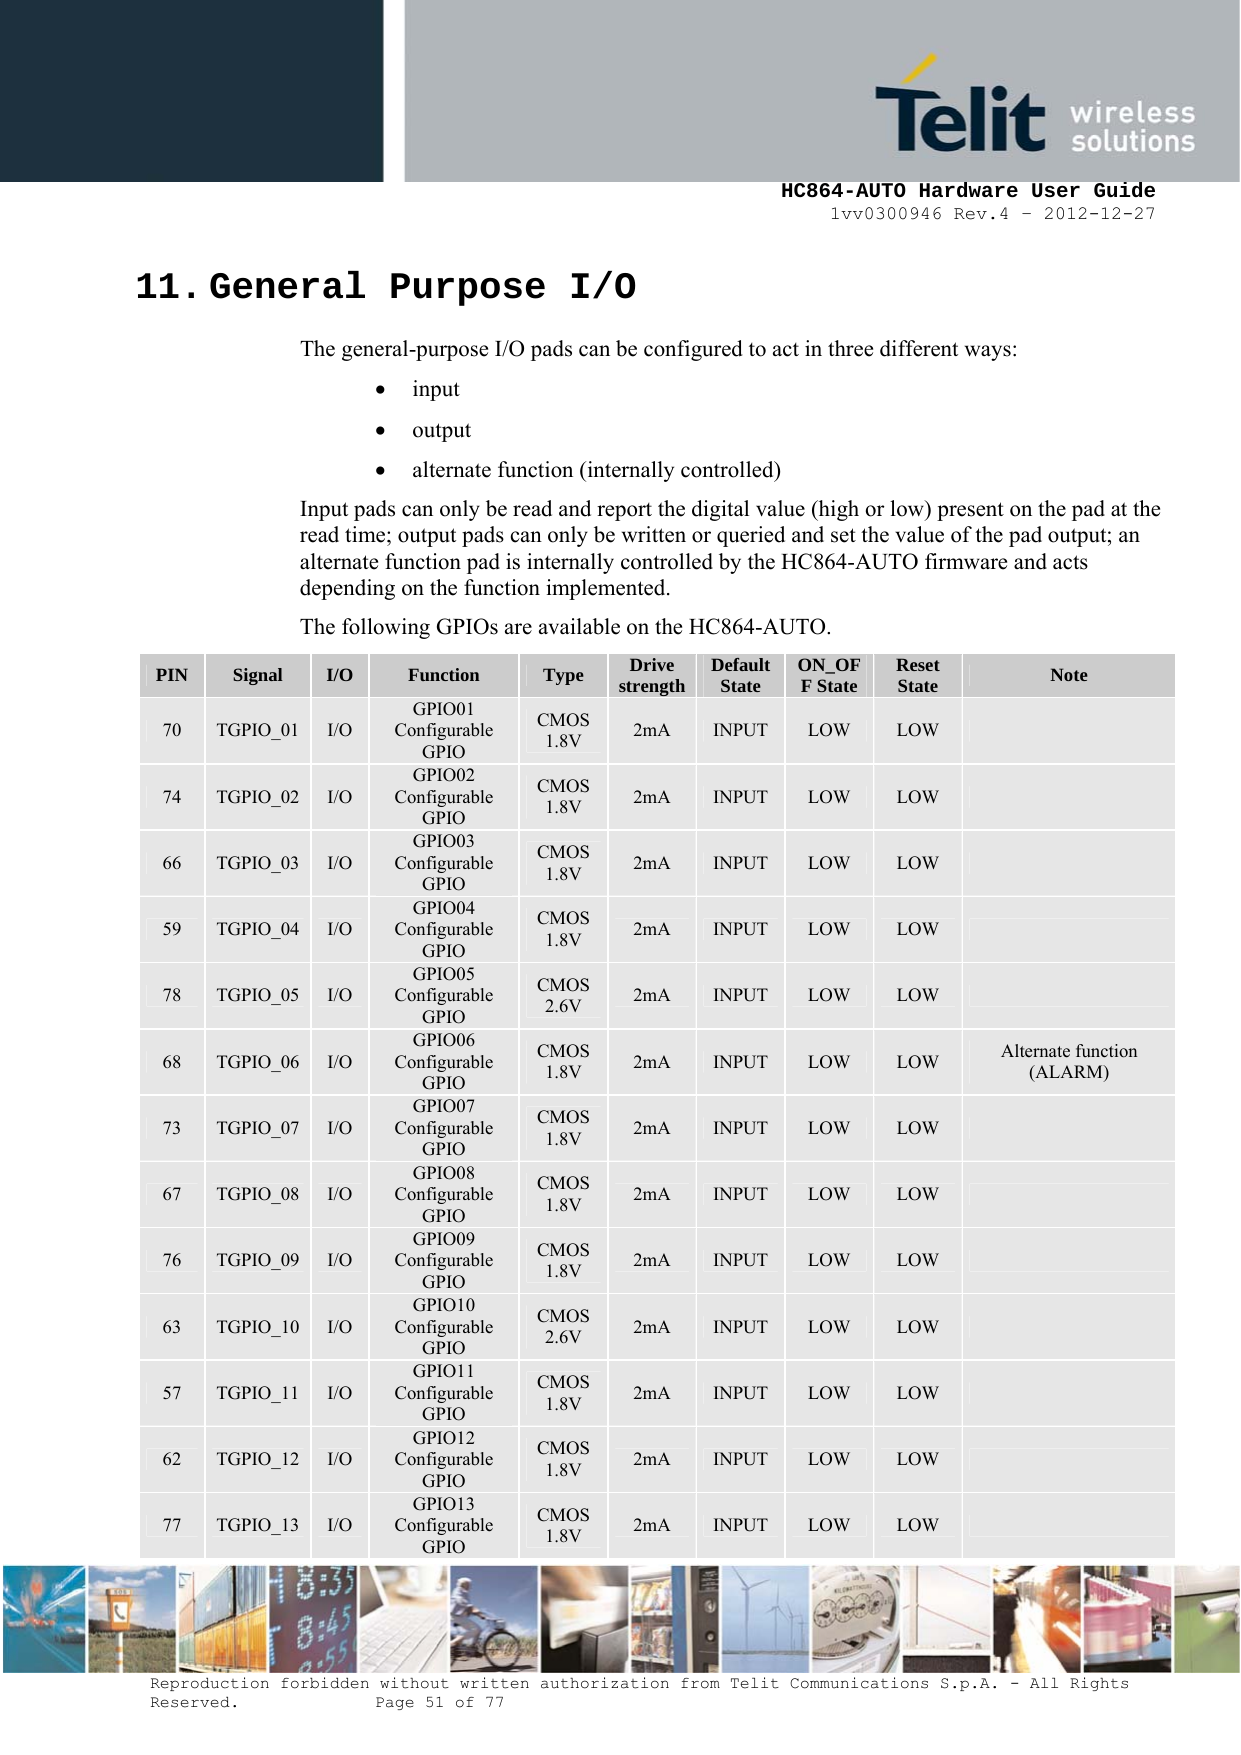     HC864-AUTO Hardware User Guide 1vv0300946 Rev.4 – 2012-12-27 Reproduction forbidden without written authorization from Telit Communications S.p.A. - All Rights Reserved.    Page 51 of 77  11. General Purpose I/O The general-purpose I/O pads can be configured to act in three different ways: • input • output • alternate function (internally controlled) Input pads can only be read and report the digital value (high or low) present on the pad at the read time; output pads can only be written or queried and set the value of the pad output; an alternate function pad is internally controlled by the HC864-AUTO firmware and acts depending on the function implemented. The following GPIOs are available on the HC864-AUTO. PIN  Signal  I/O  Function  Type  Drive strength Default State  ON_OFF State Reset State  Note 70  TGPIO_01  I/O GPIO01 Configurable GPIO CMOS 1.8V  2mA  INPUT LOW  LOW   74  TGPIO_02  I/O GPIO02 Configurable GPIO CMOS 1.8V  2mA  INPUT LOW  LOW   66  TGPIO_03  I/O GPIO03 Configurable GPIO CMOS 1.8V  2mA  INPUT LOW  LOW   59  TGPIO_04  I/O GPIO04 Configurable GPIO CMOS 1.8V  2mA  INPUT LOW  LOW   78  TGPIO_05  I/O GPIO05 Configurable GPIO CMOS 2.6V  2mA  INPUT LOW  LOW   68  TGPIO_06  I/O GPIO06 Configurable GPIO CMOS 1.8V  2mA  INPUT LOW  LOW  Alternate function (ALARM) 73  TGPIO_07  I/O GPIO07 Configurable GPIO CMOS 1.8V  2mA  INPUT LOW  LOW   67  TGPIO_08  I/O GPIO08 Configurable GPIO CMOS 1.8V  2mA  INPUT LOW  LOW   76  TGPIO_09  I/O GPIO09 Configurable GPIO CMOS 1.8V  2mA  INPUT LOW  LOW   63  TGPIO_10  I/O GPIO10 Configurable GPIO CMOS 2.6V  2mA  INPUT LOW  LOW   57  TGPIO_11  I/O GPIO11 Configurable GPIO CMOS 1.8V  2mA  INPUT LOW  LOW   62  TGPIO_12  I/O GPIO12 Configurable GPIO CMOS 1.8V  2mA  INPUT LOW  LOW   77  TGPIO_13  I/O GPIO13 Configurable GPIO CMOS 1.8V  2mA  INPUT LOW  LOW   